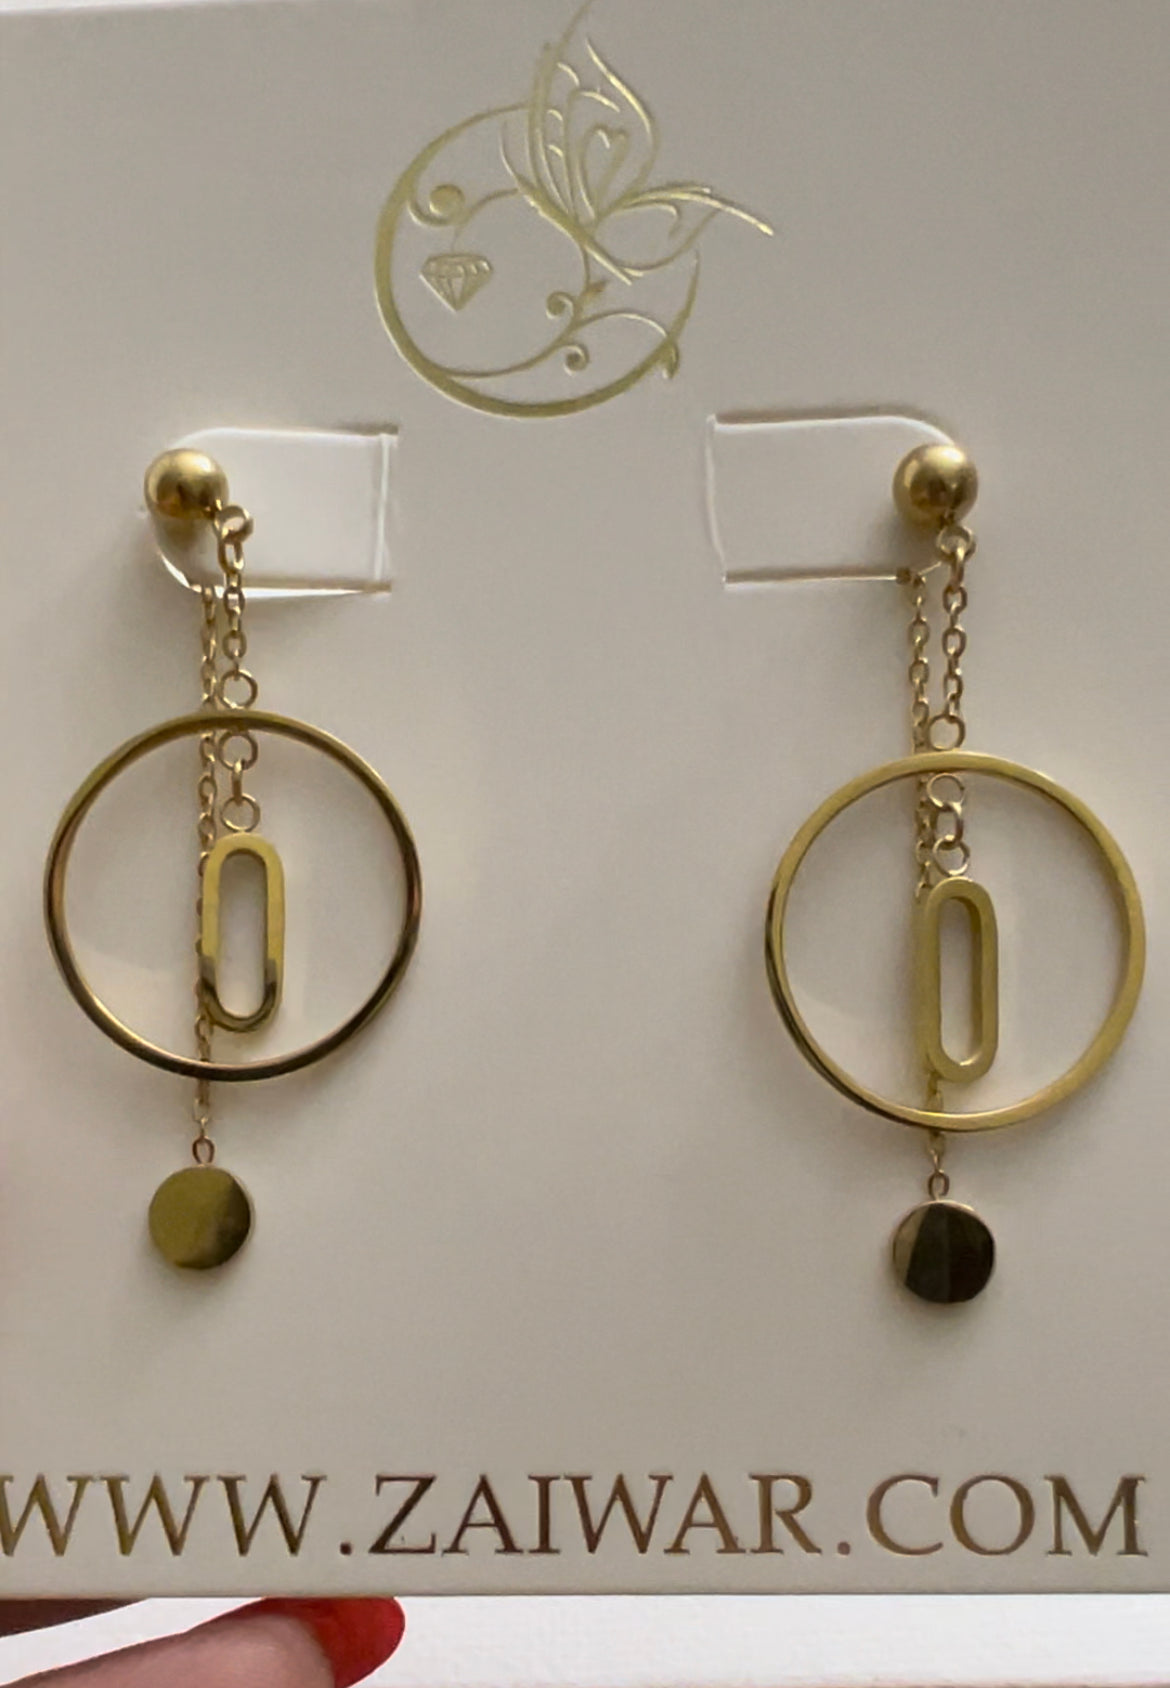 Two In One Gold Circle Earrings